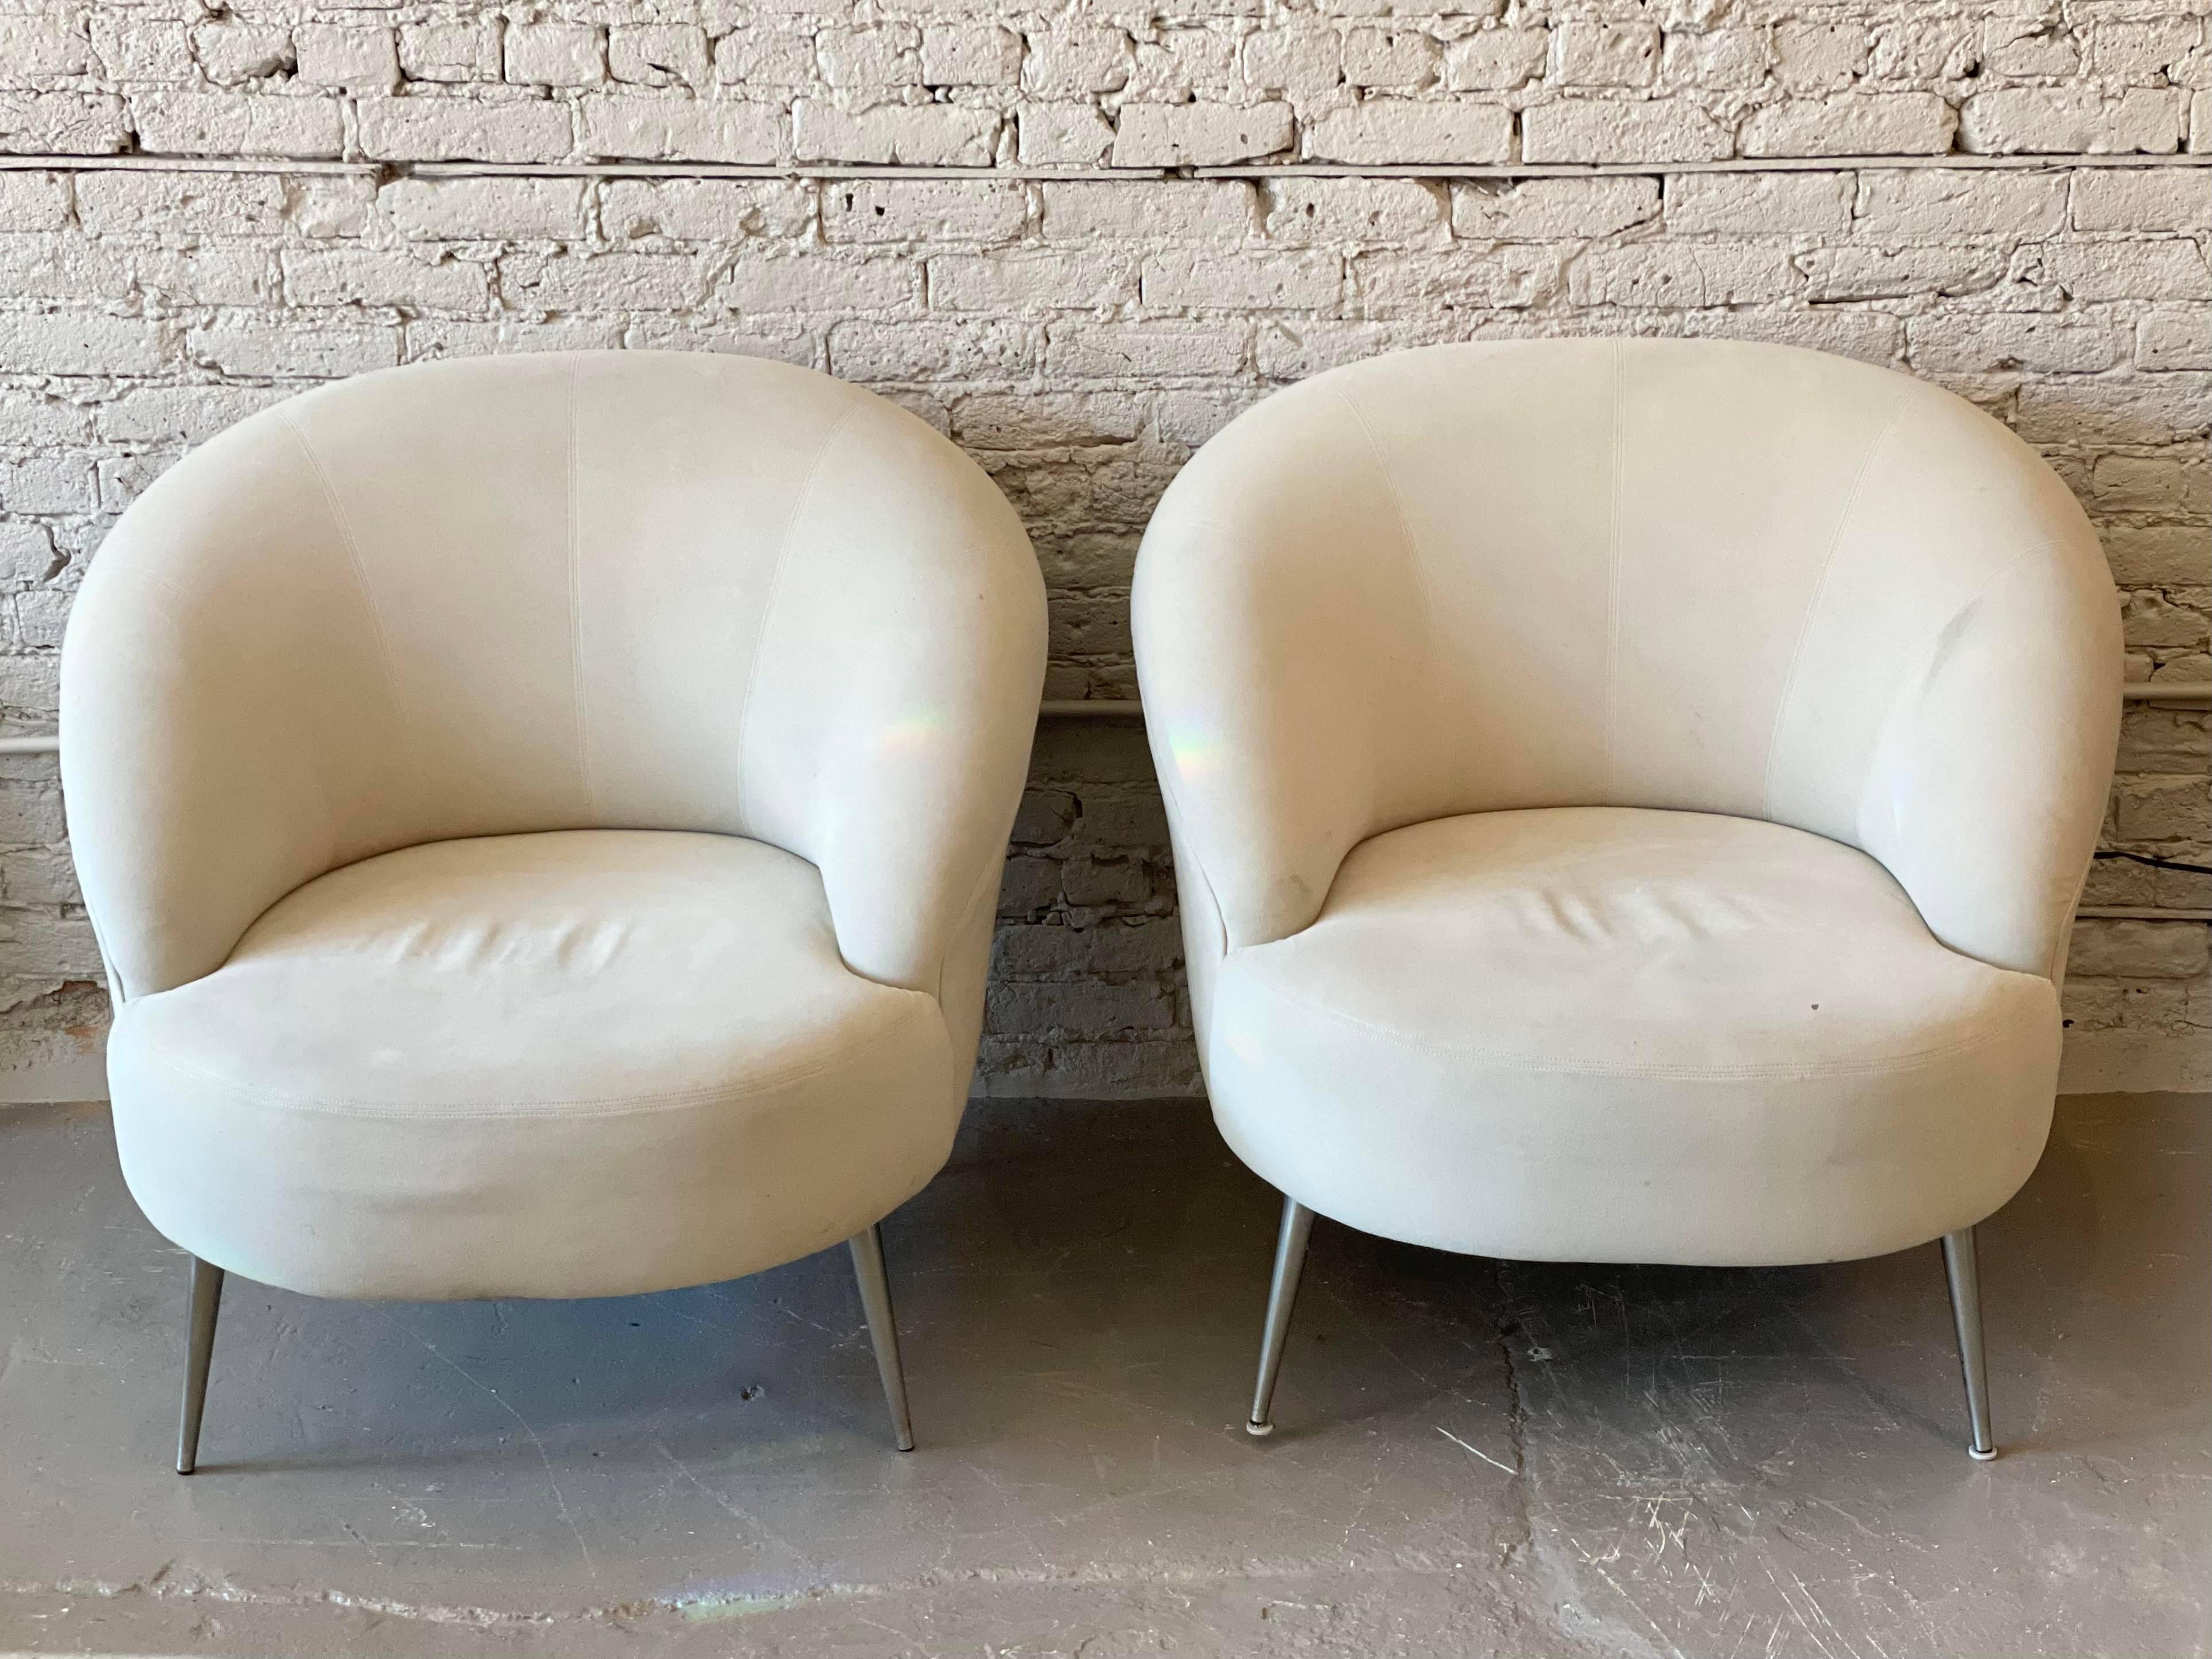 20th Century Oversized Postmodern Directional Lounge Chairs, a Pair For Sale